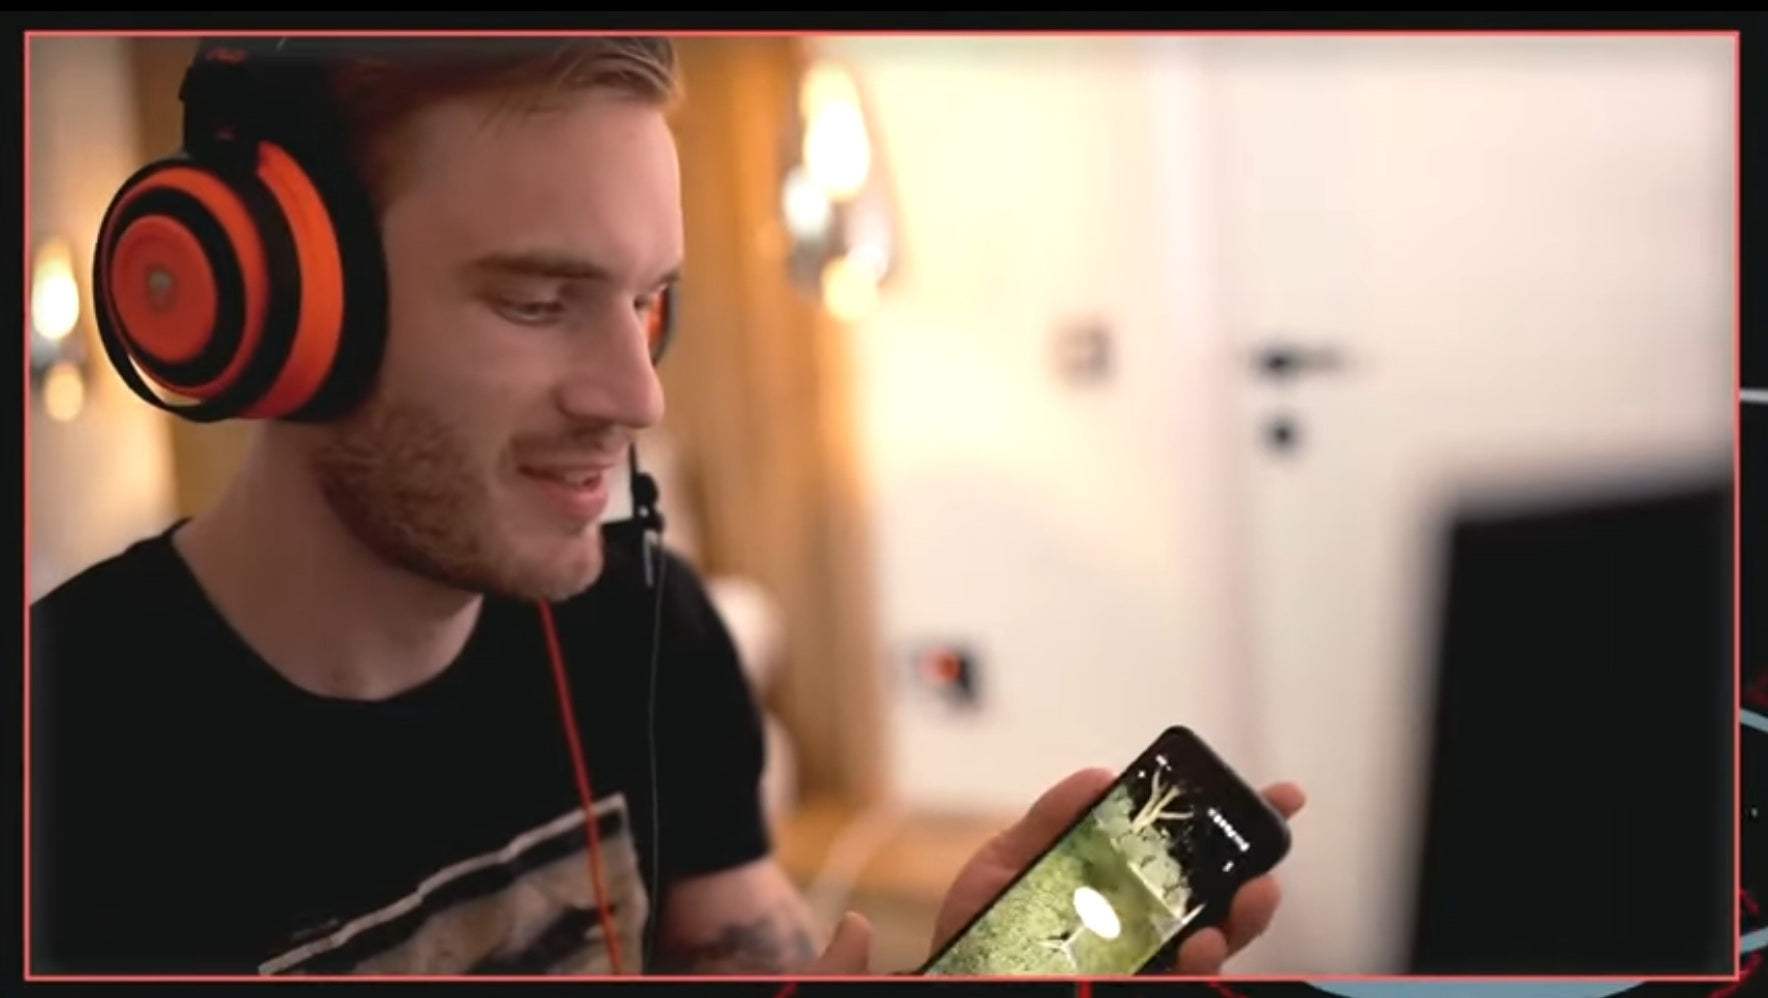 YouTuber PewDiePie Shares He Is Using SpaceX's Starlink Internet –‘You literally just plug it in & Bam! you got internet!’